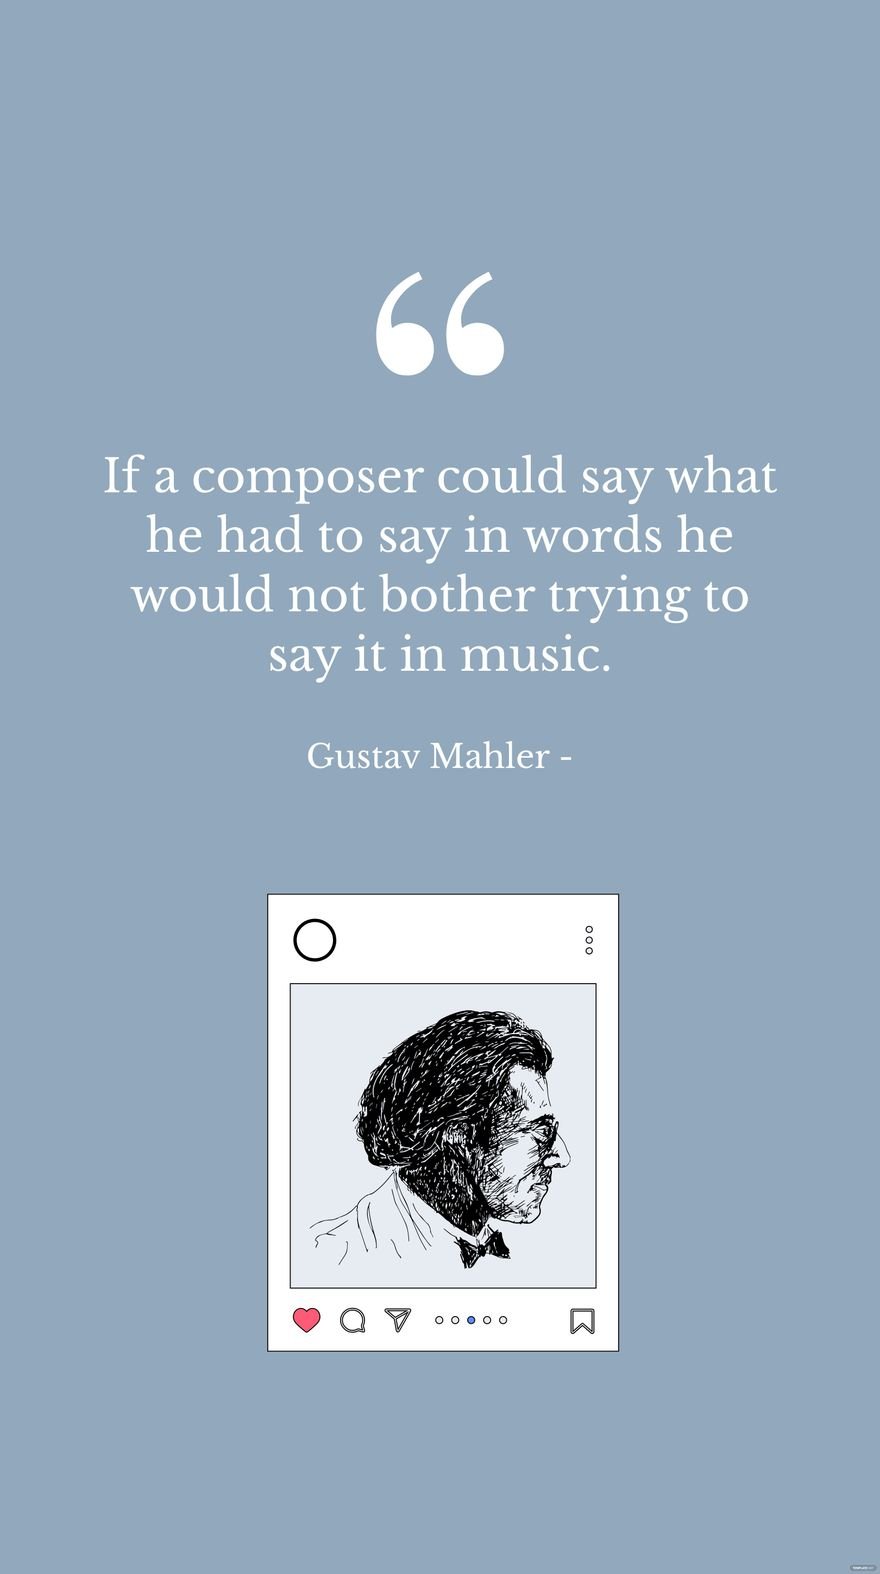 Gustav Mahler - If a composer could say what he had to say in words he would not bother trying to say it in music.